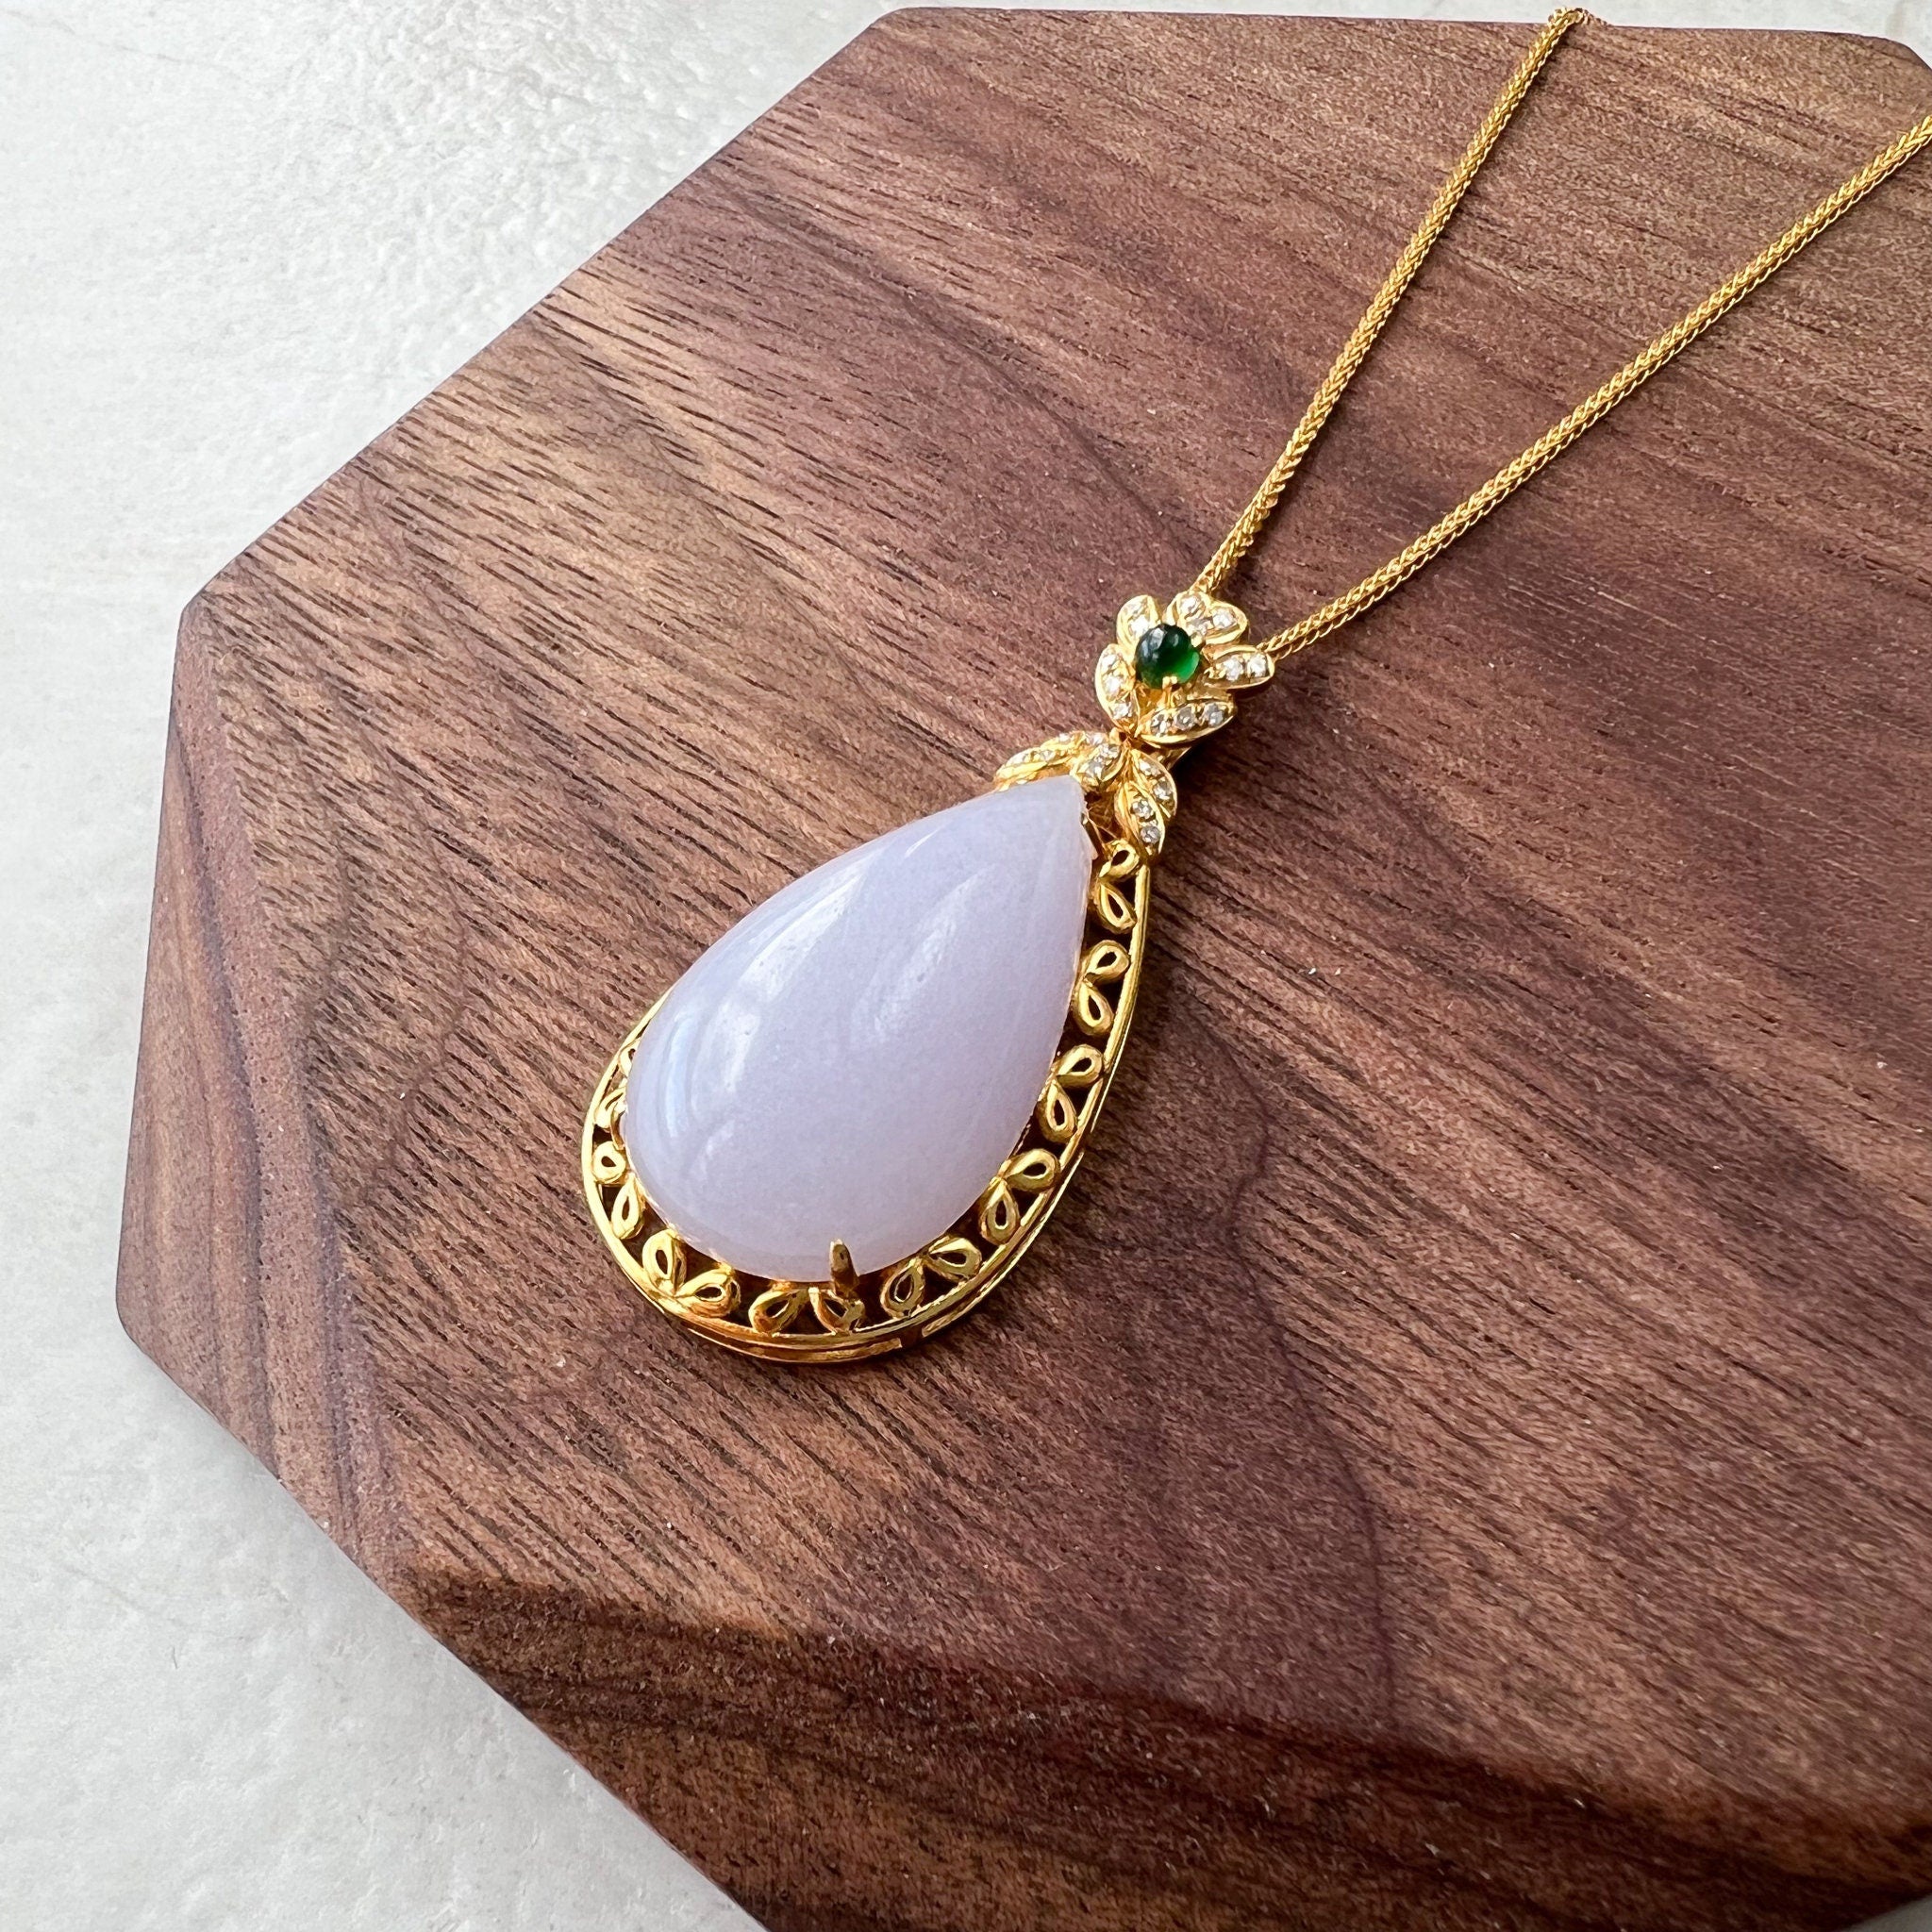 Lavender Tanzanite Gold Necklace | Vintage Style Jewelry Handmade in Italy  – Ortica